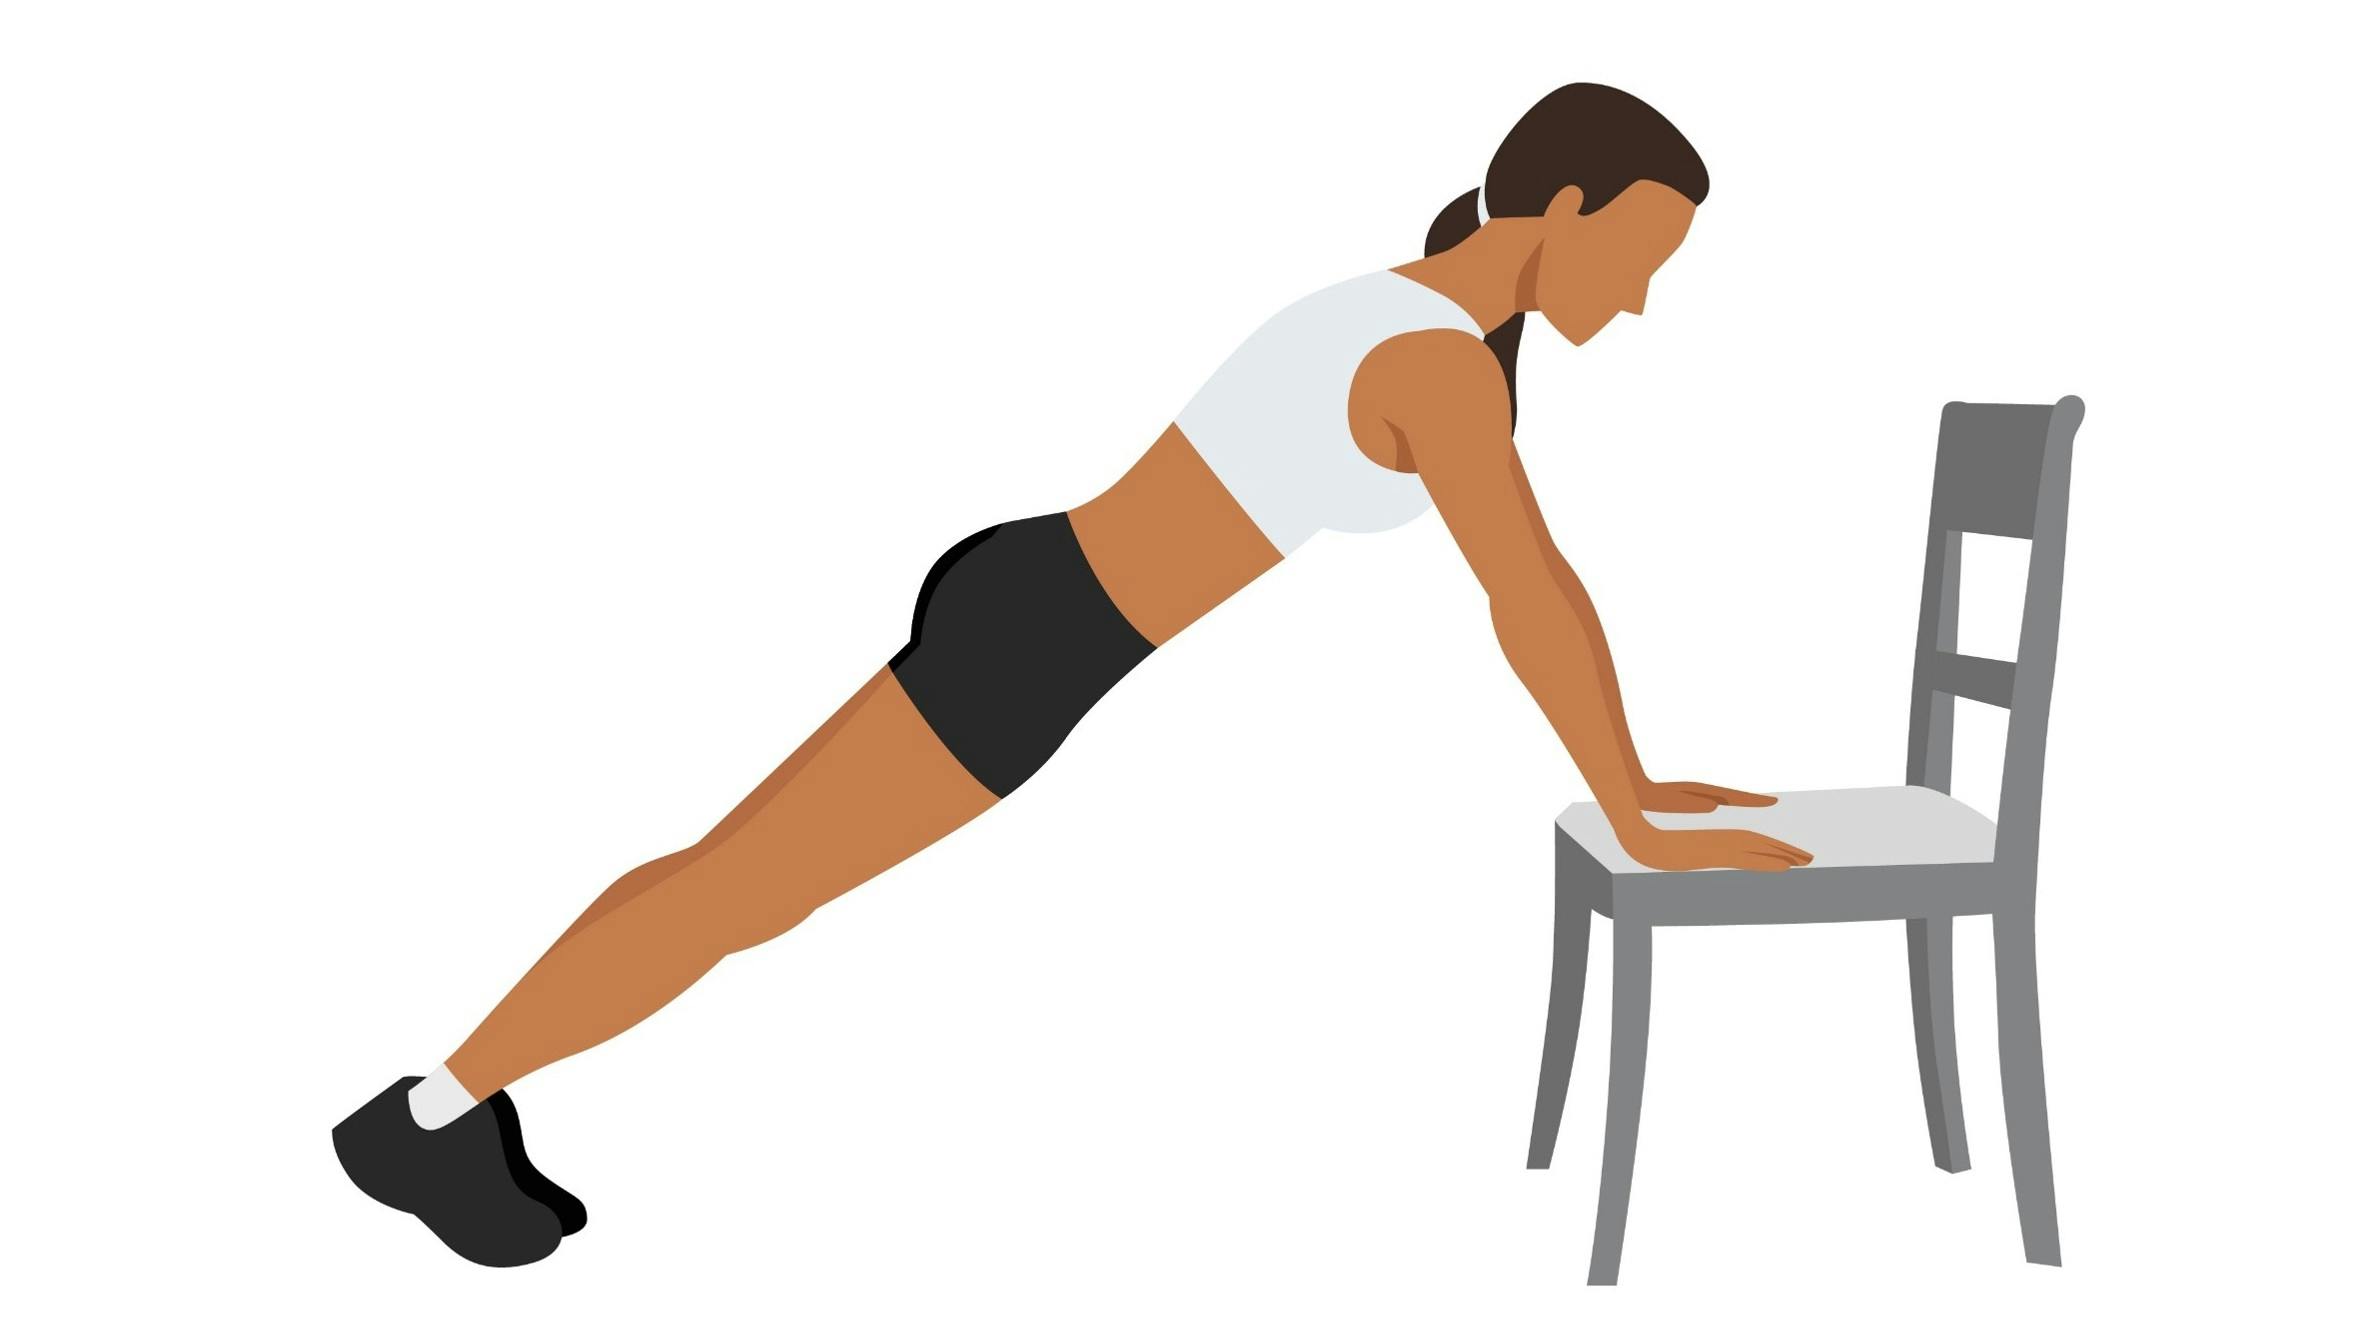 Modified plank on chair or bench exercise illustration